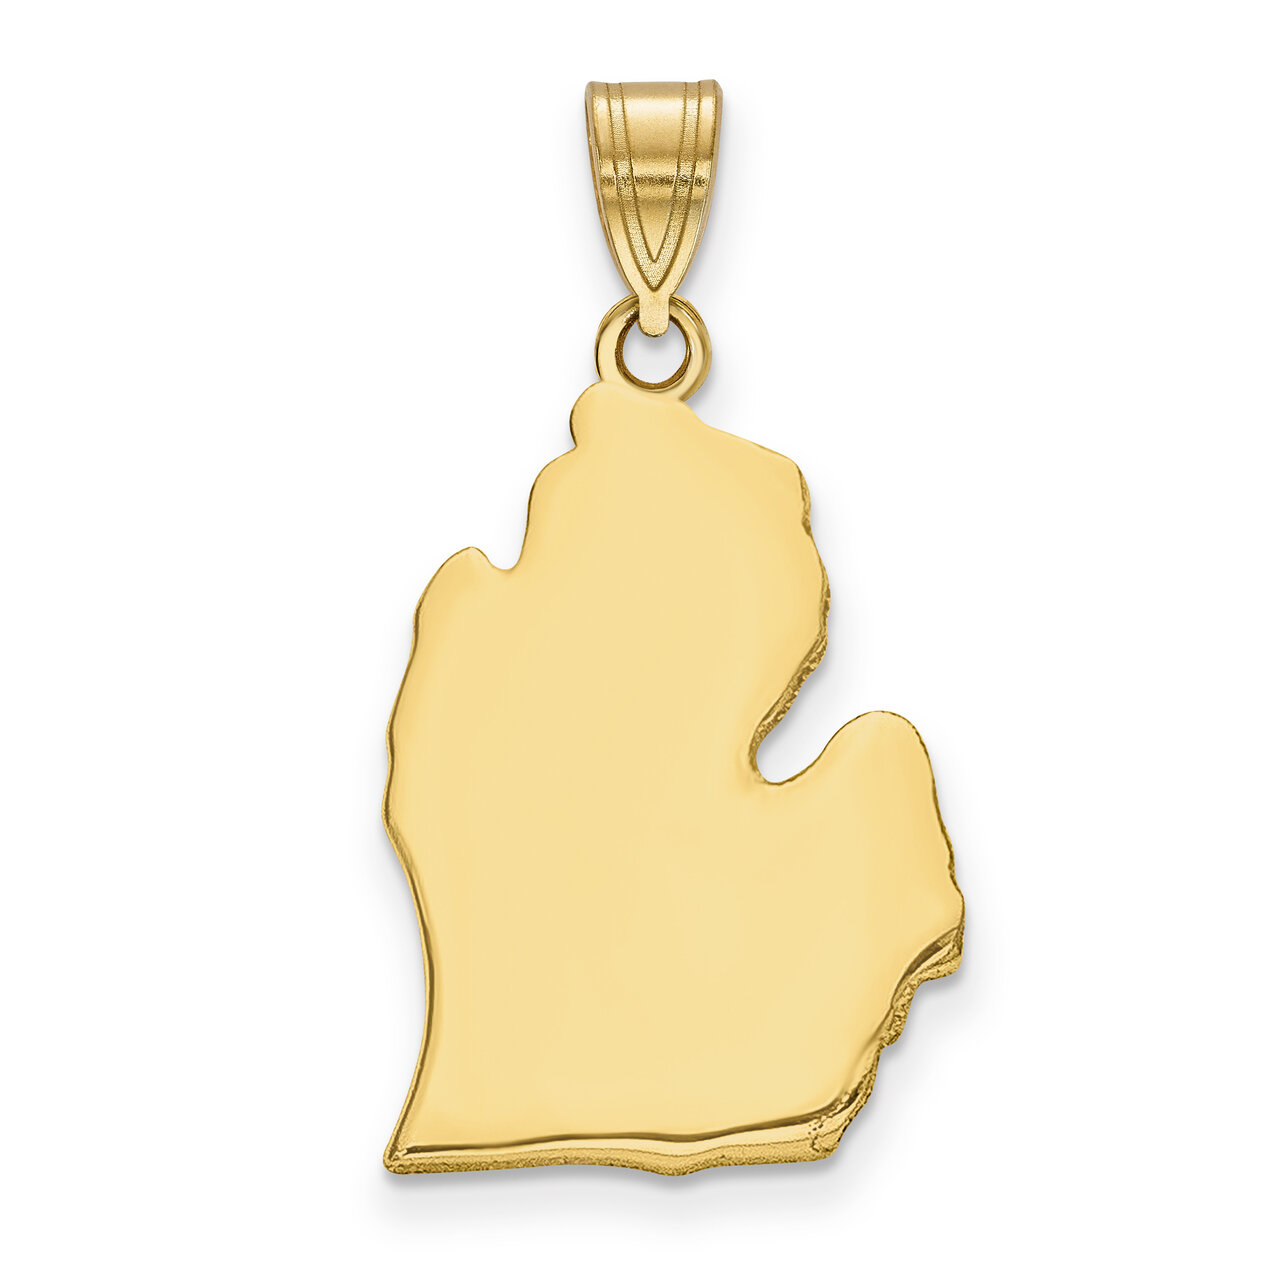 Michigan State Pendant Charm Gold-plated on Silver Engravable XNA707GP-MI